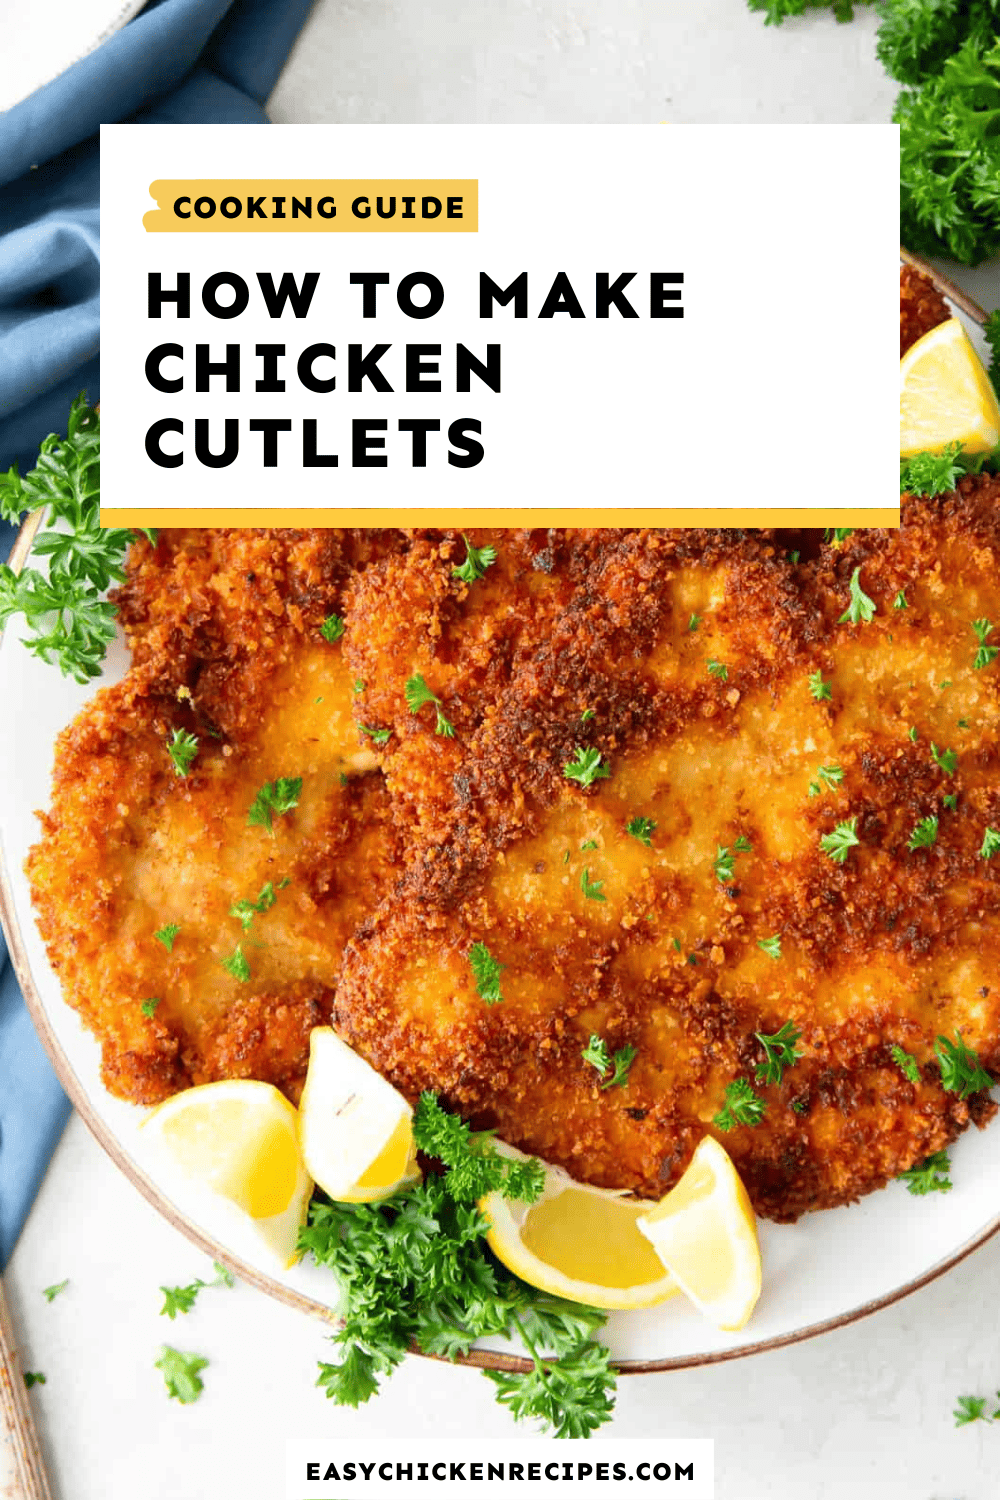 Best Bolognese-Style Chicken Cutlets Recipe - How to Make